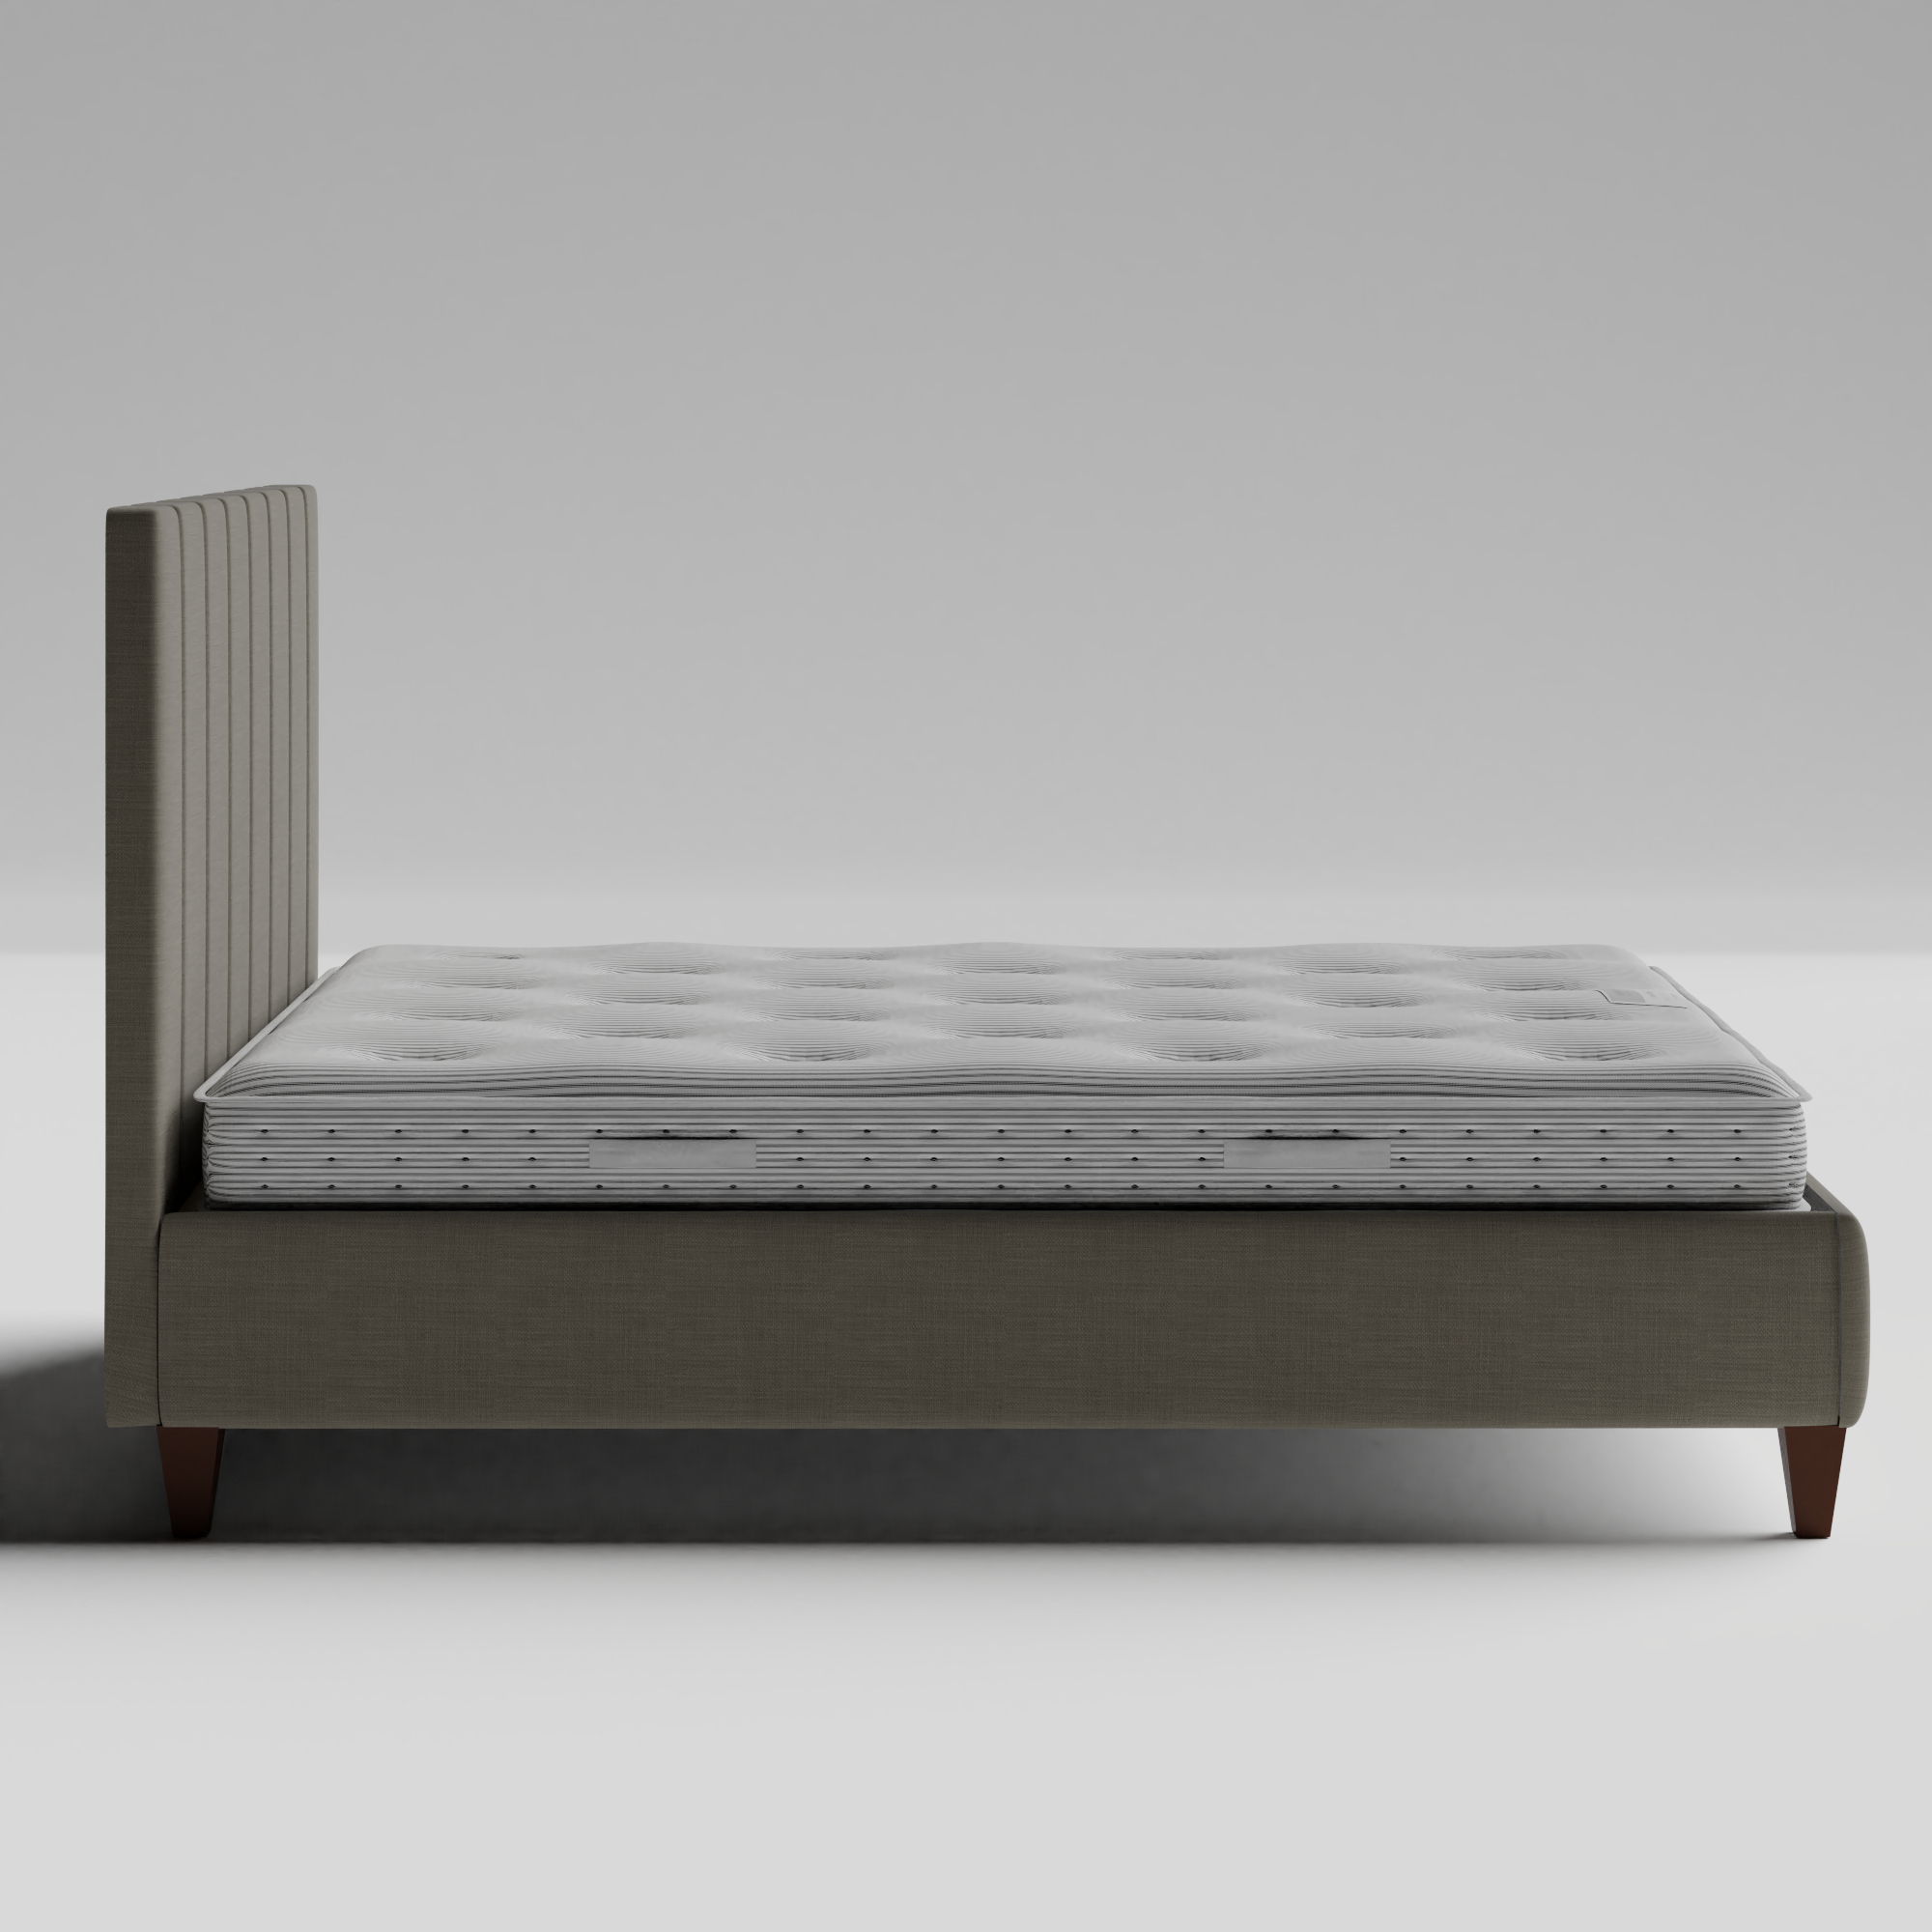 Yushan Pleated stoffen bed in grijs met lades